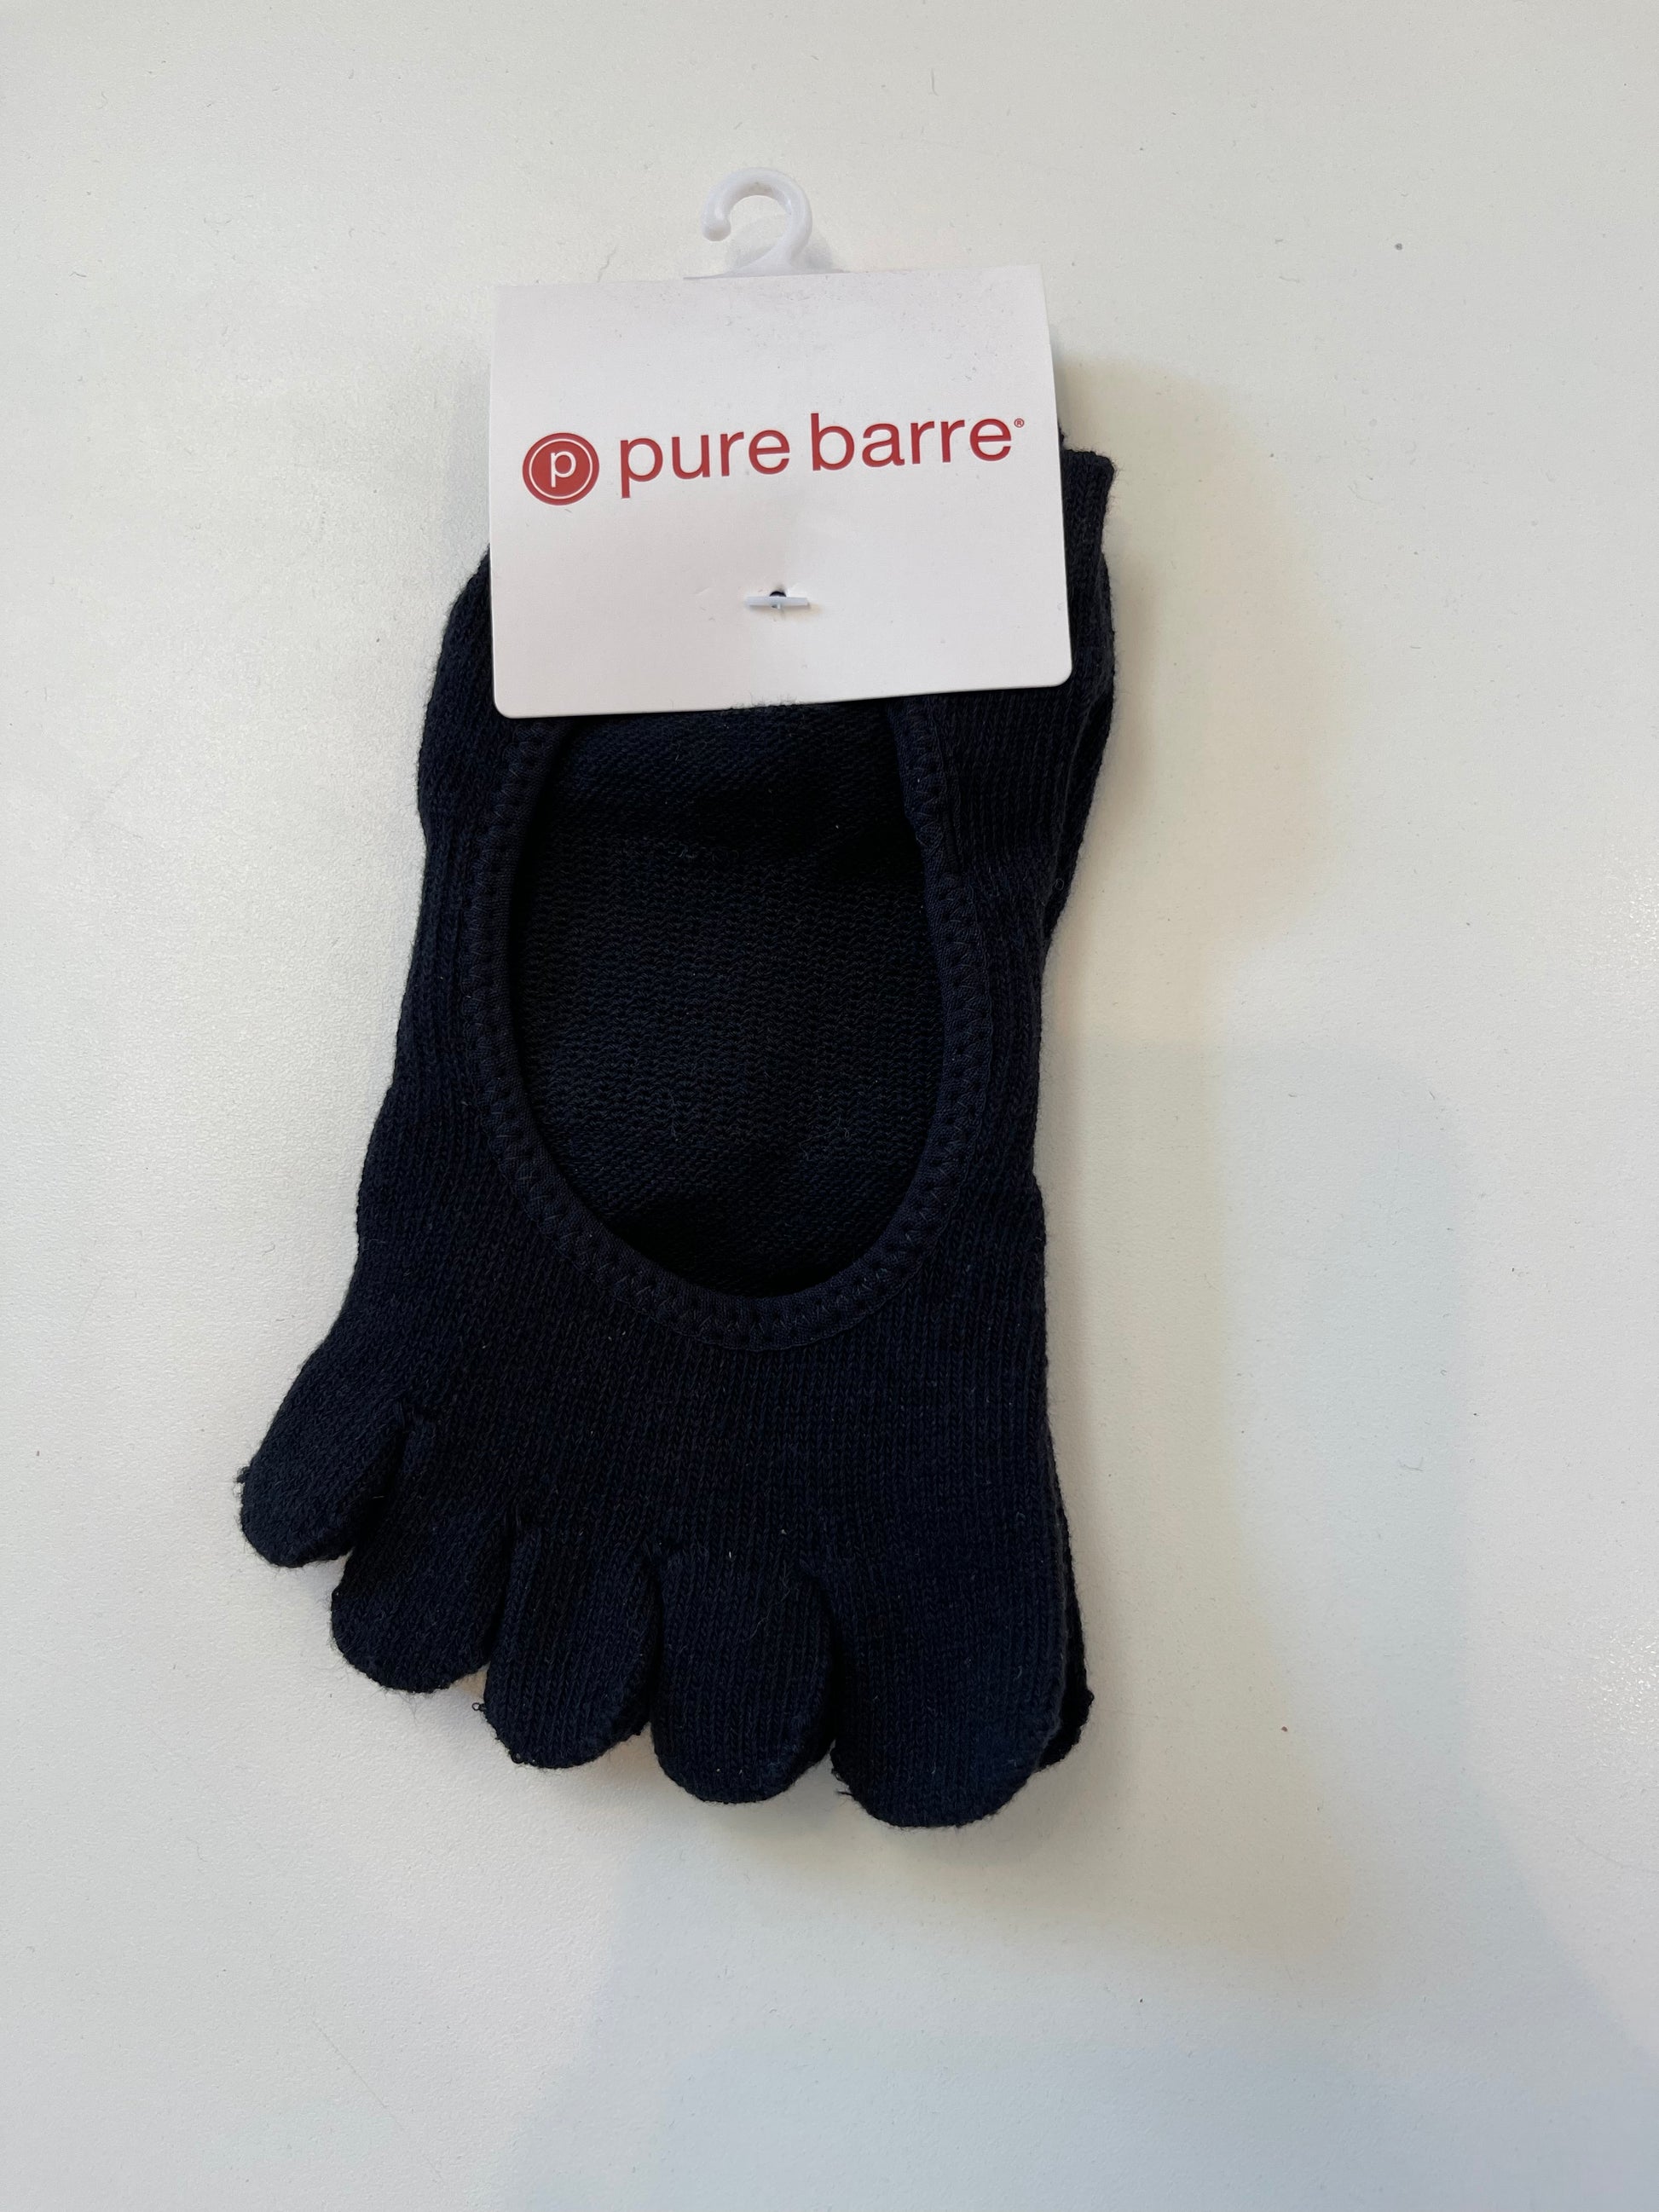 Pure Barre - Treat your feet 🛍💘 NEW Spring socks are in!! #purebarresocks  #